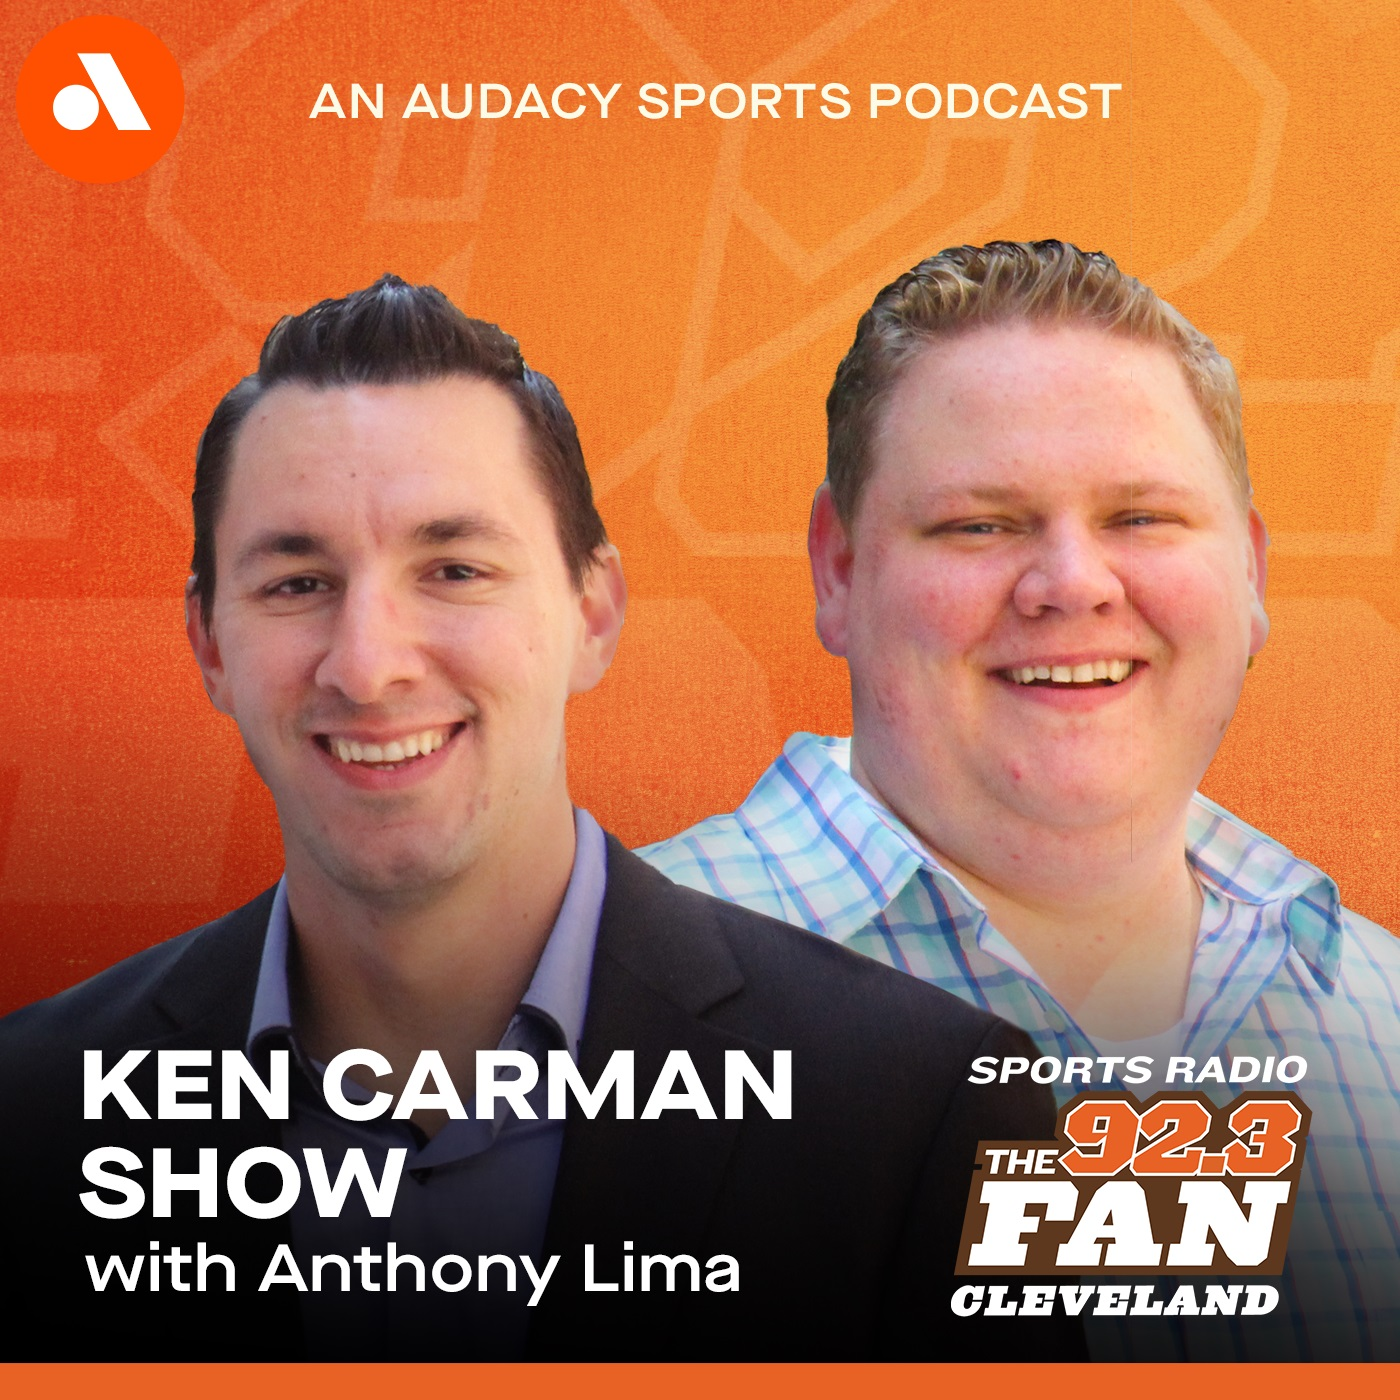 The Ken Carman Show with Anthony Lima - Does LeBron really miss Cleveland